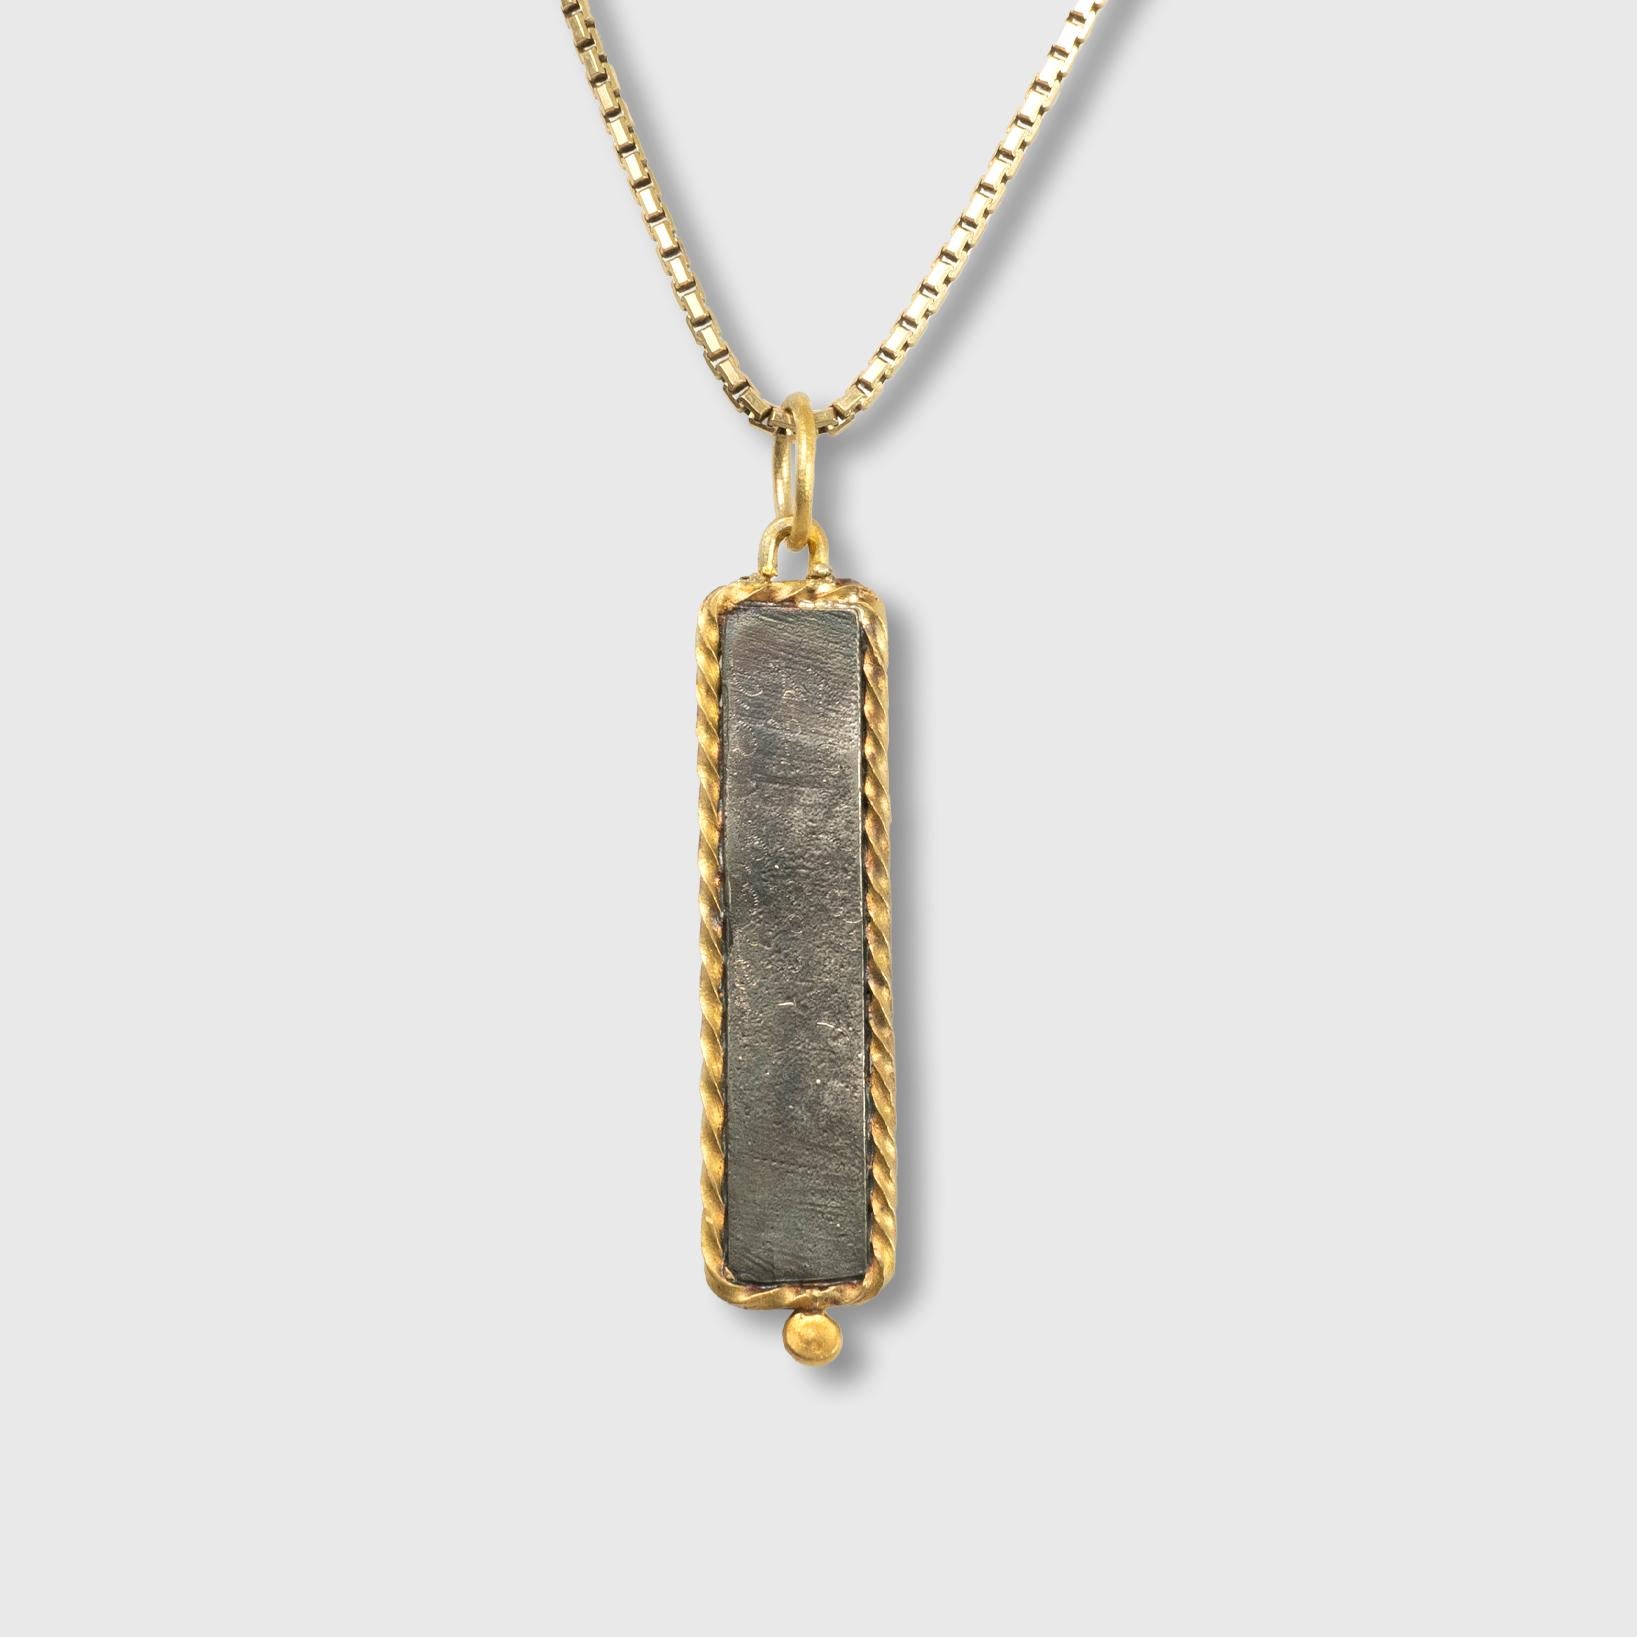 Framed, 24kt Yellow Gold, Long Blue & Silver, Enameled Pendant with 0.02 Diamonds

Size - Small, 1.25 inches long
24k Gold - 1.82 grams
SS 925 - 1.40 grams

Enamel jewelry has been around since the 13th century B.C.E. Since then, it has evolved and